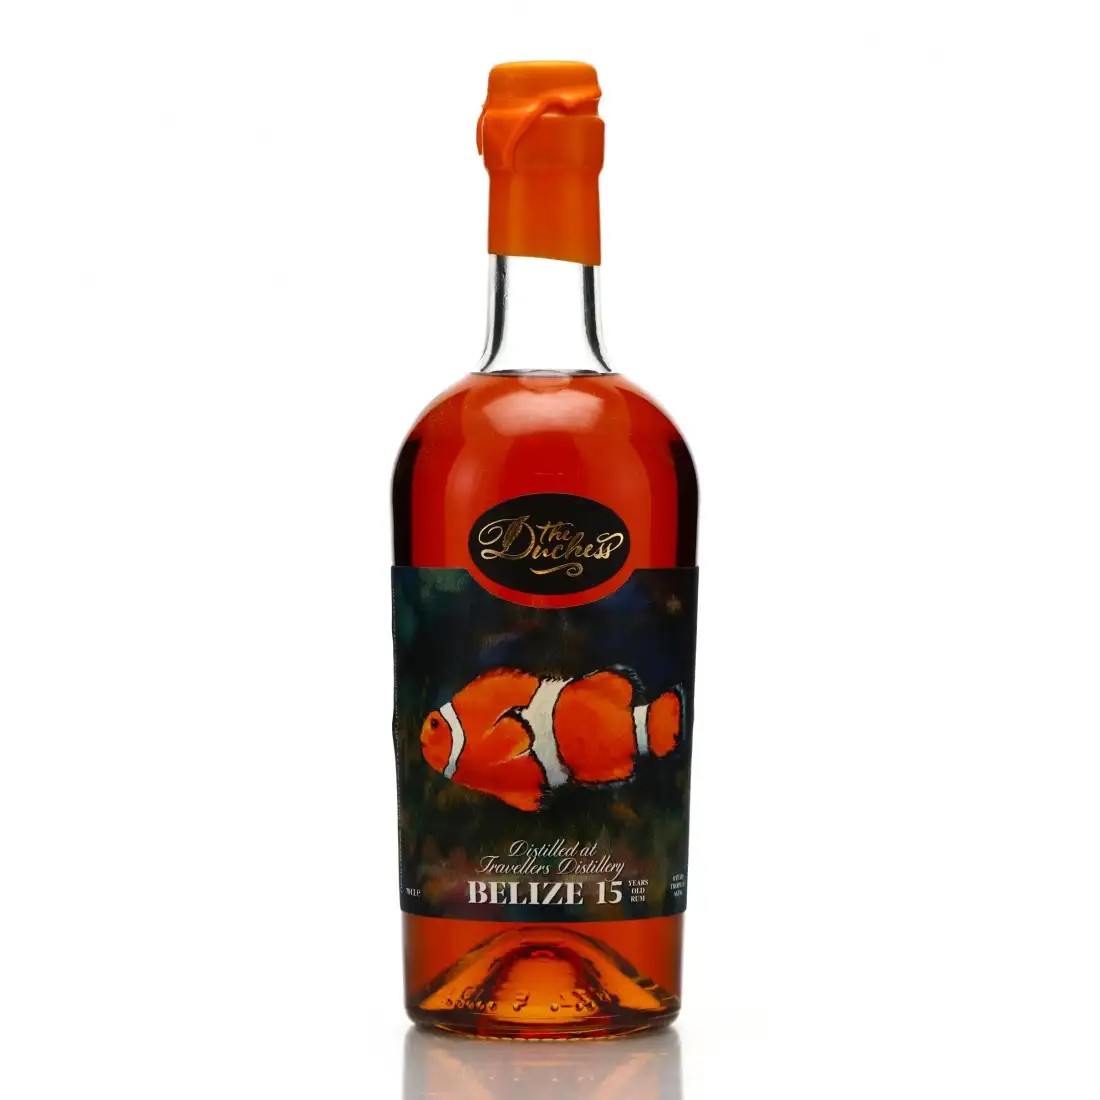 Image of the front of the bottle of the rum Belize 15